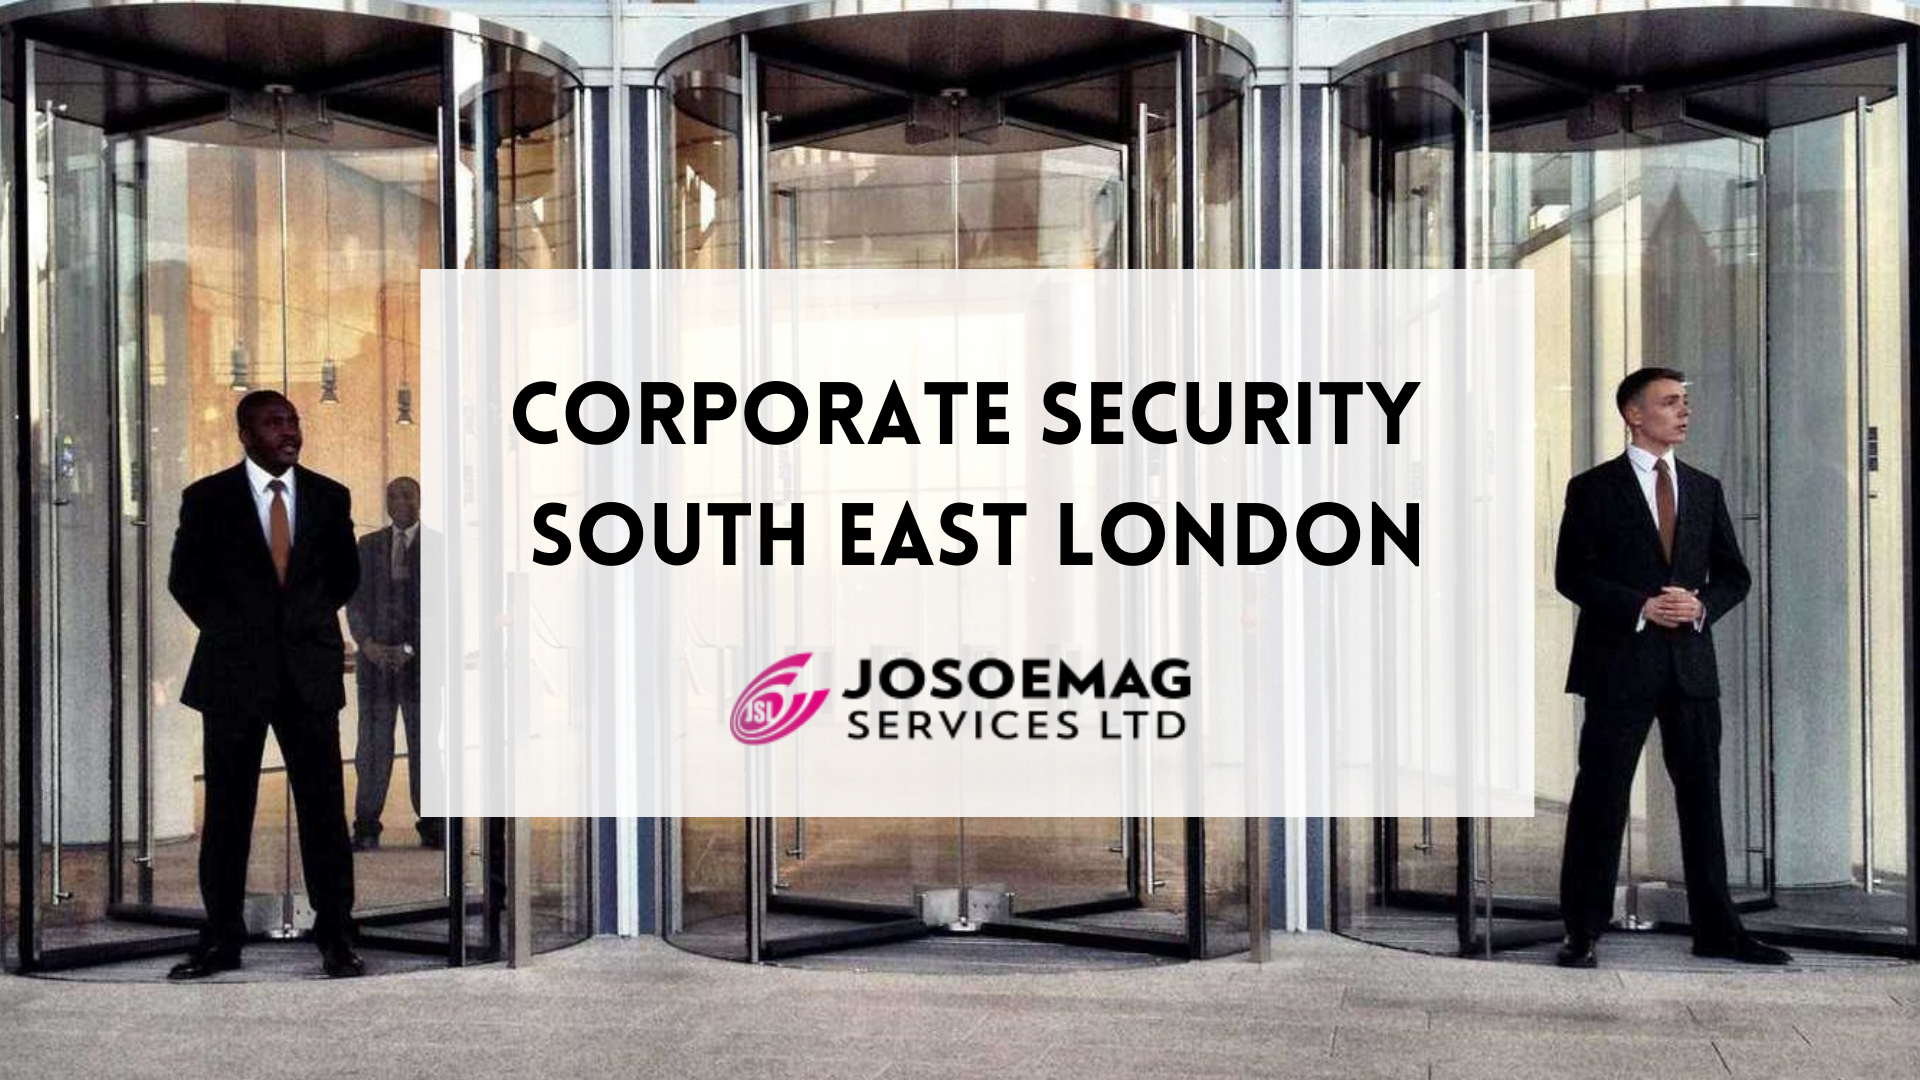 Find The Best Lewisham Security Guards For Your Business: Static & Mobile Patrols